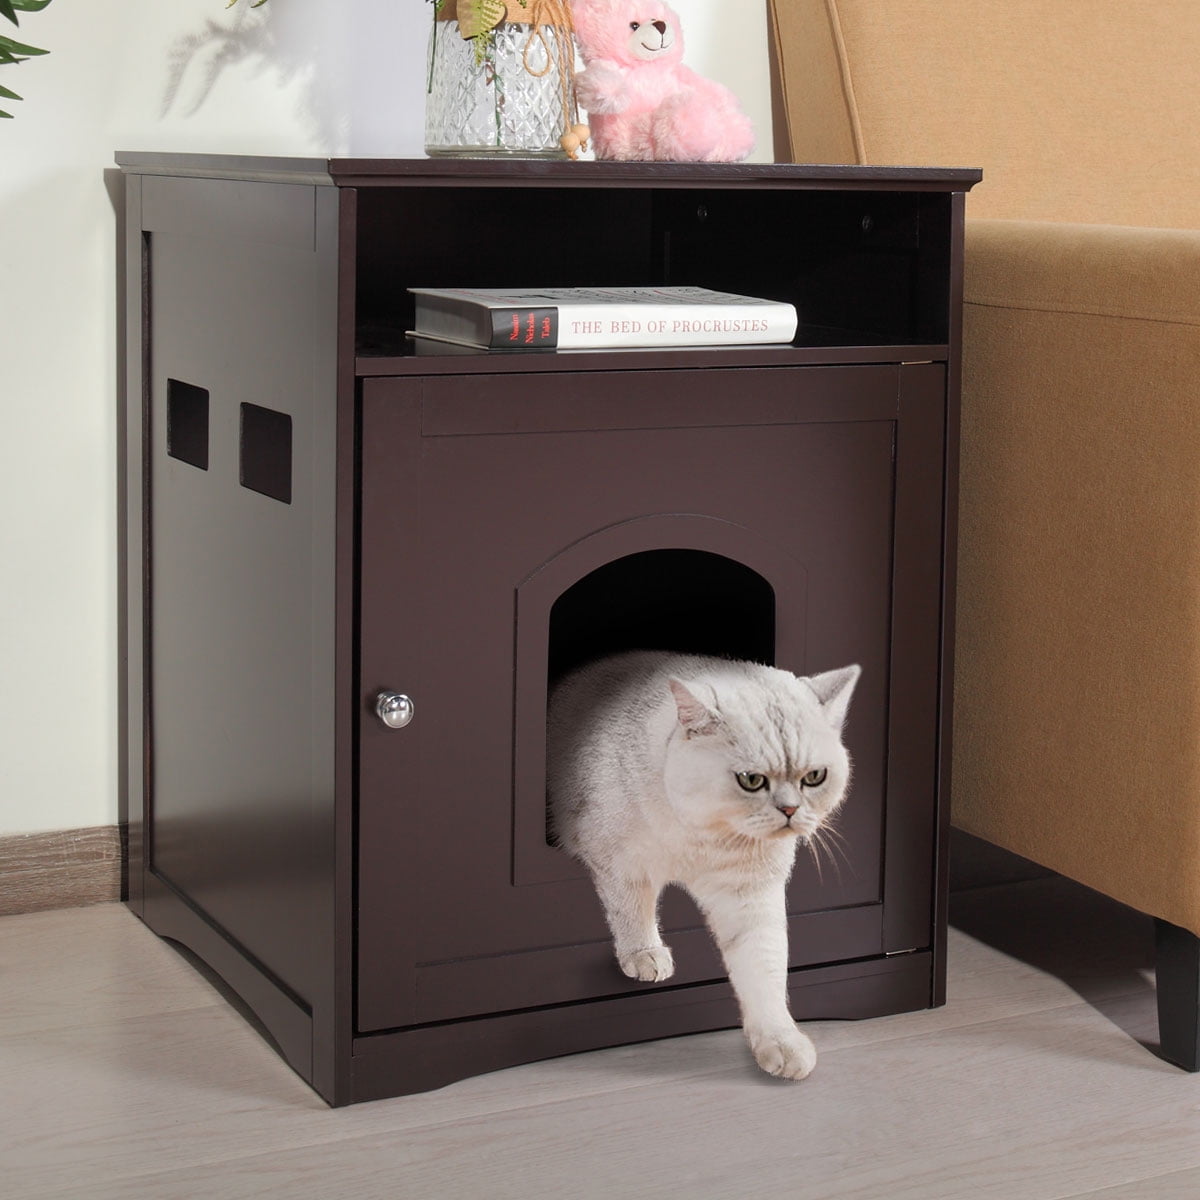 Veryke Wooden Pet Cat House nclosure Outside Shelter Animal Cage, Brown